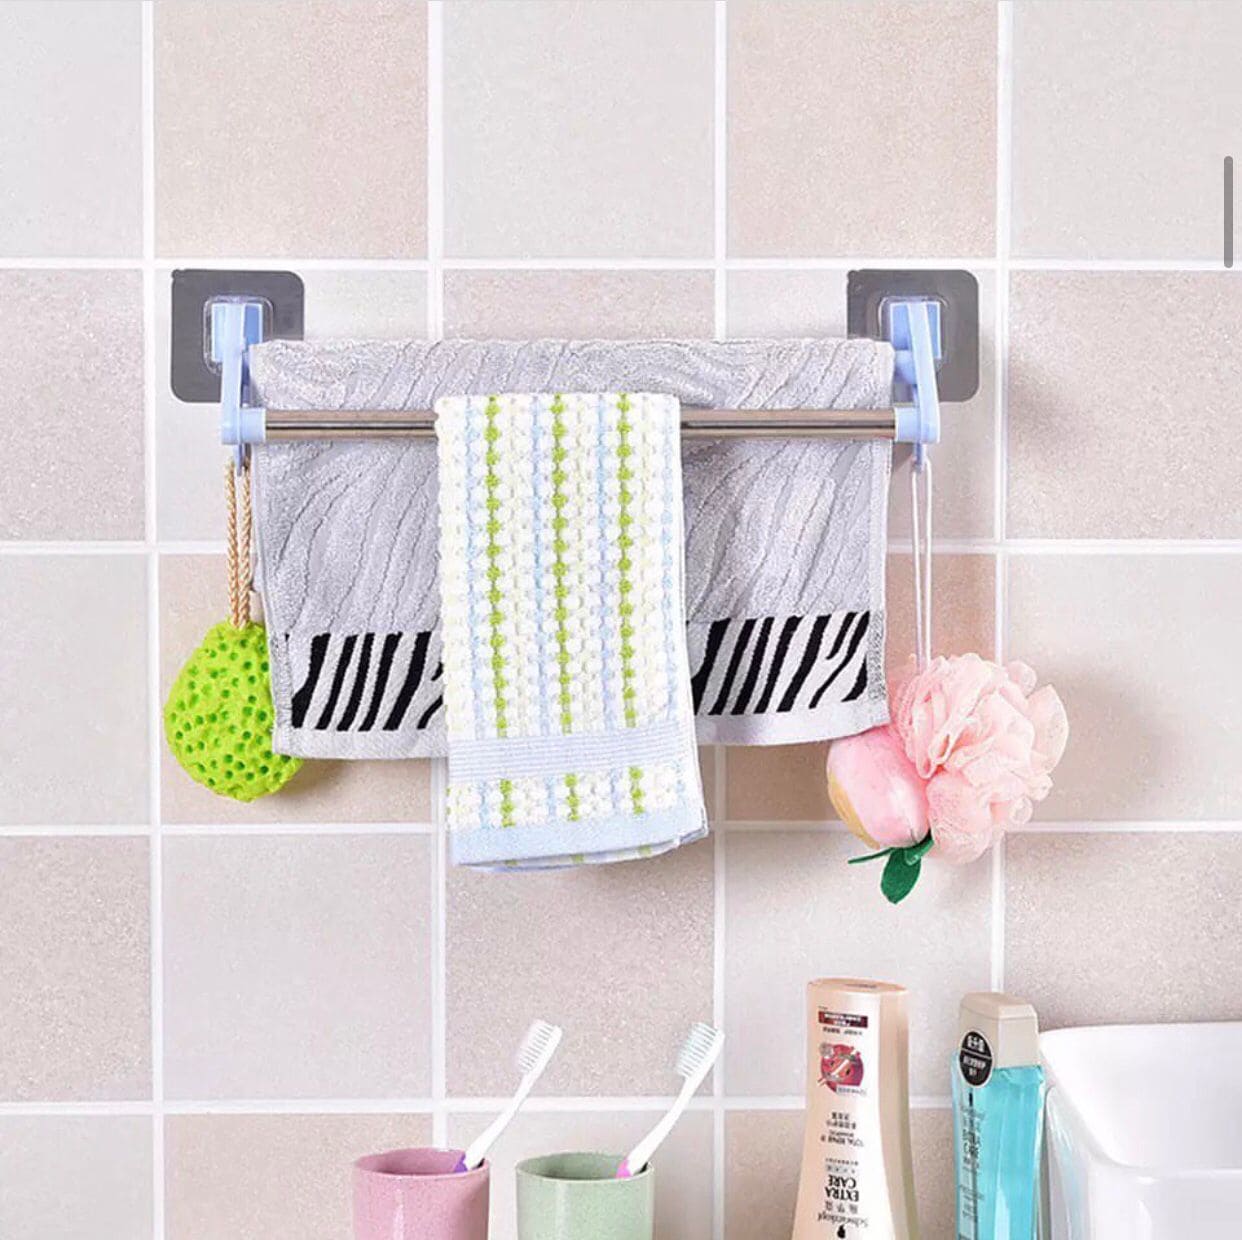 Stainless Steel Wall Mounted Double Shelf Bathroom Towel Rack, Self Adhesive Bath Wall Shelf with 2 Hooks, Wall Mounted Non Perforated Kitchen Utensils Rack